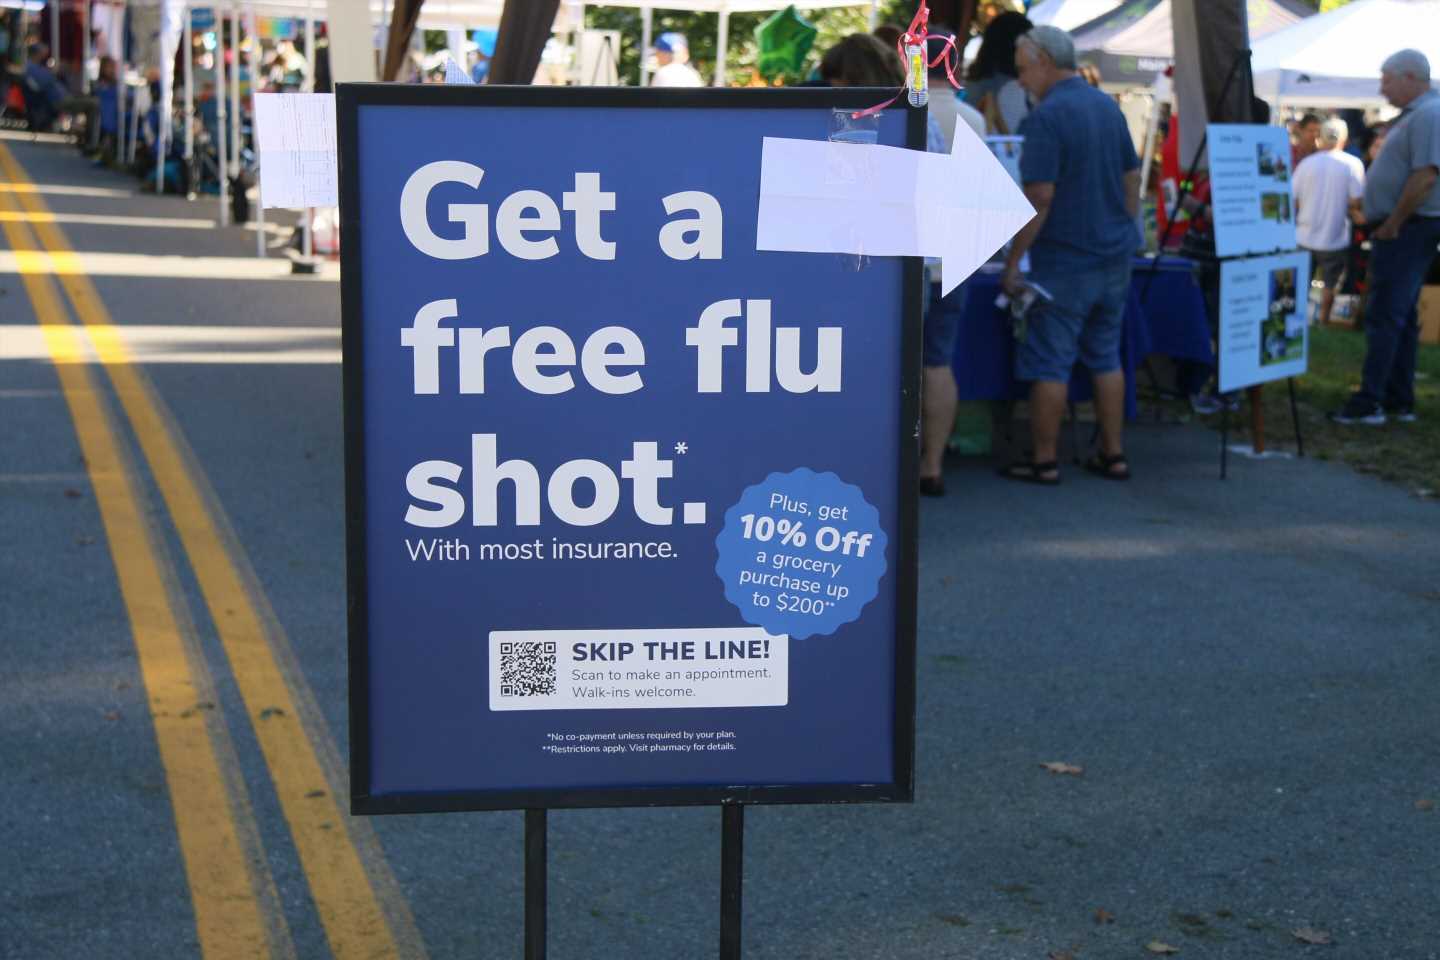 Experts say now is the time to get your flu shot